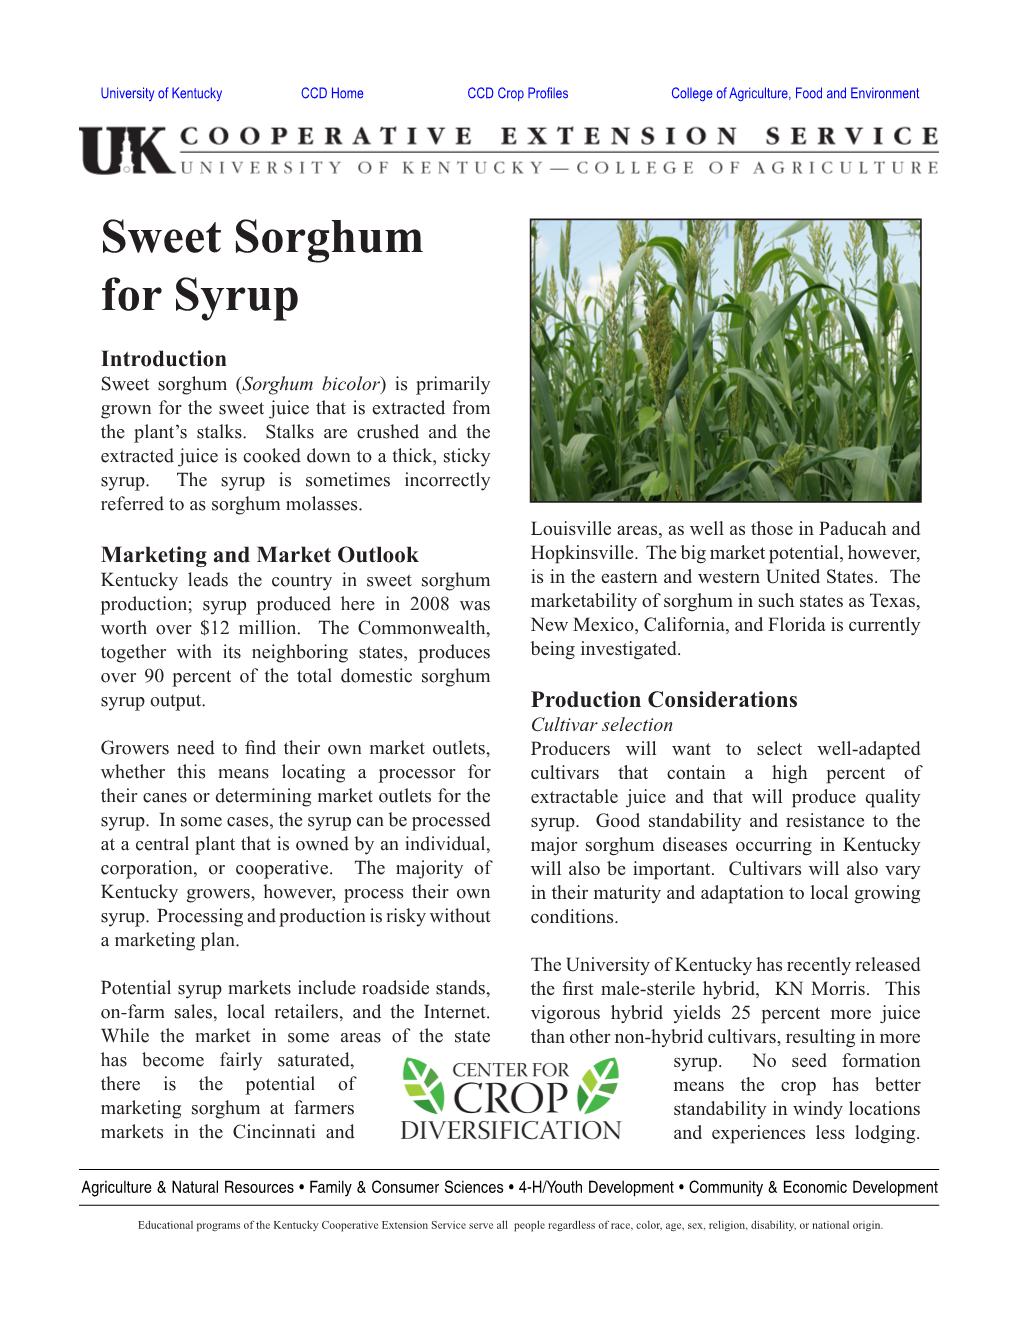 CCD Sweet Sorghum for Syrup Profile